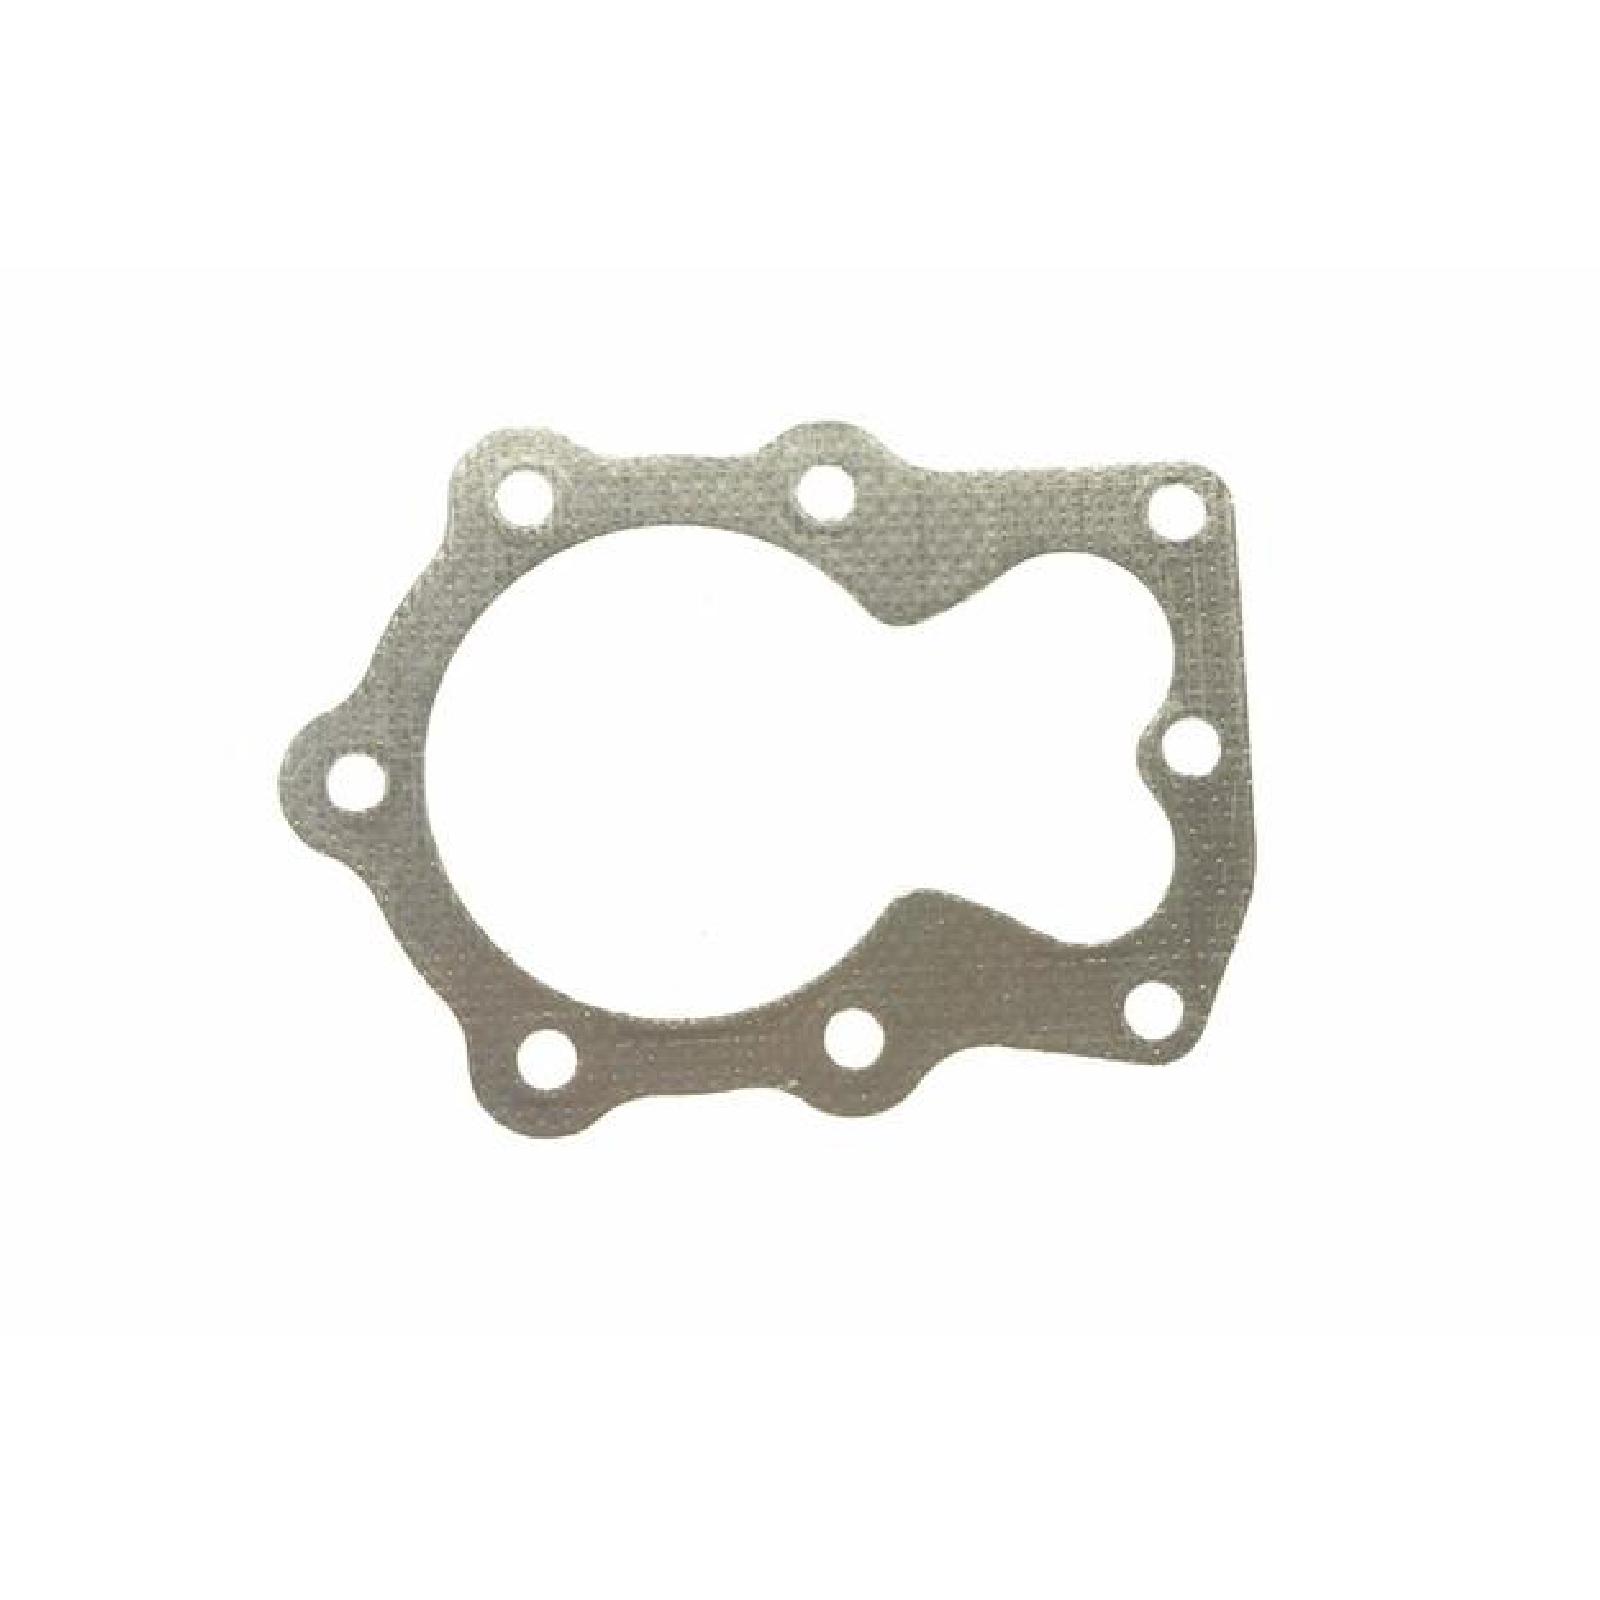 GASKET part# 37796 by Tecumseh - Click Image to Close